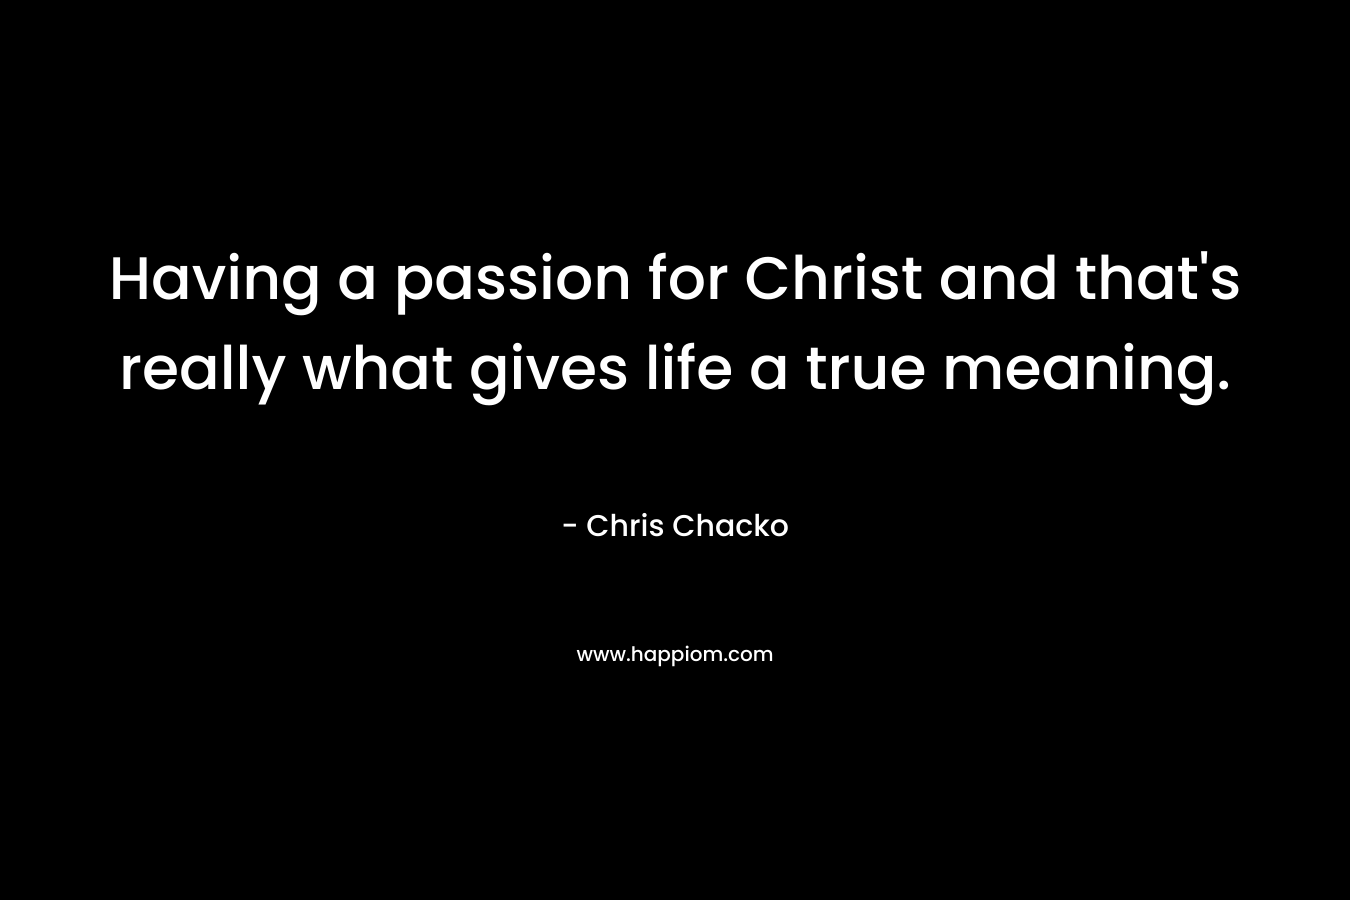 Having a passion for Christ and that’s really what gives life a true meaning. – Chris Chacko